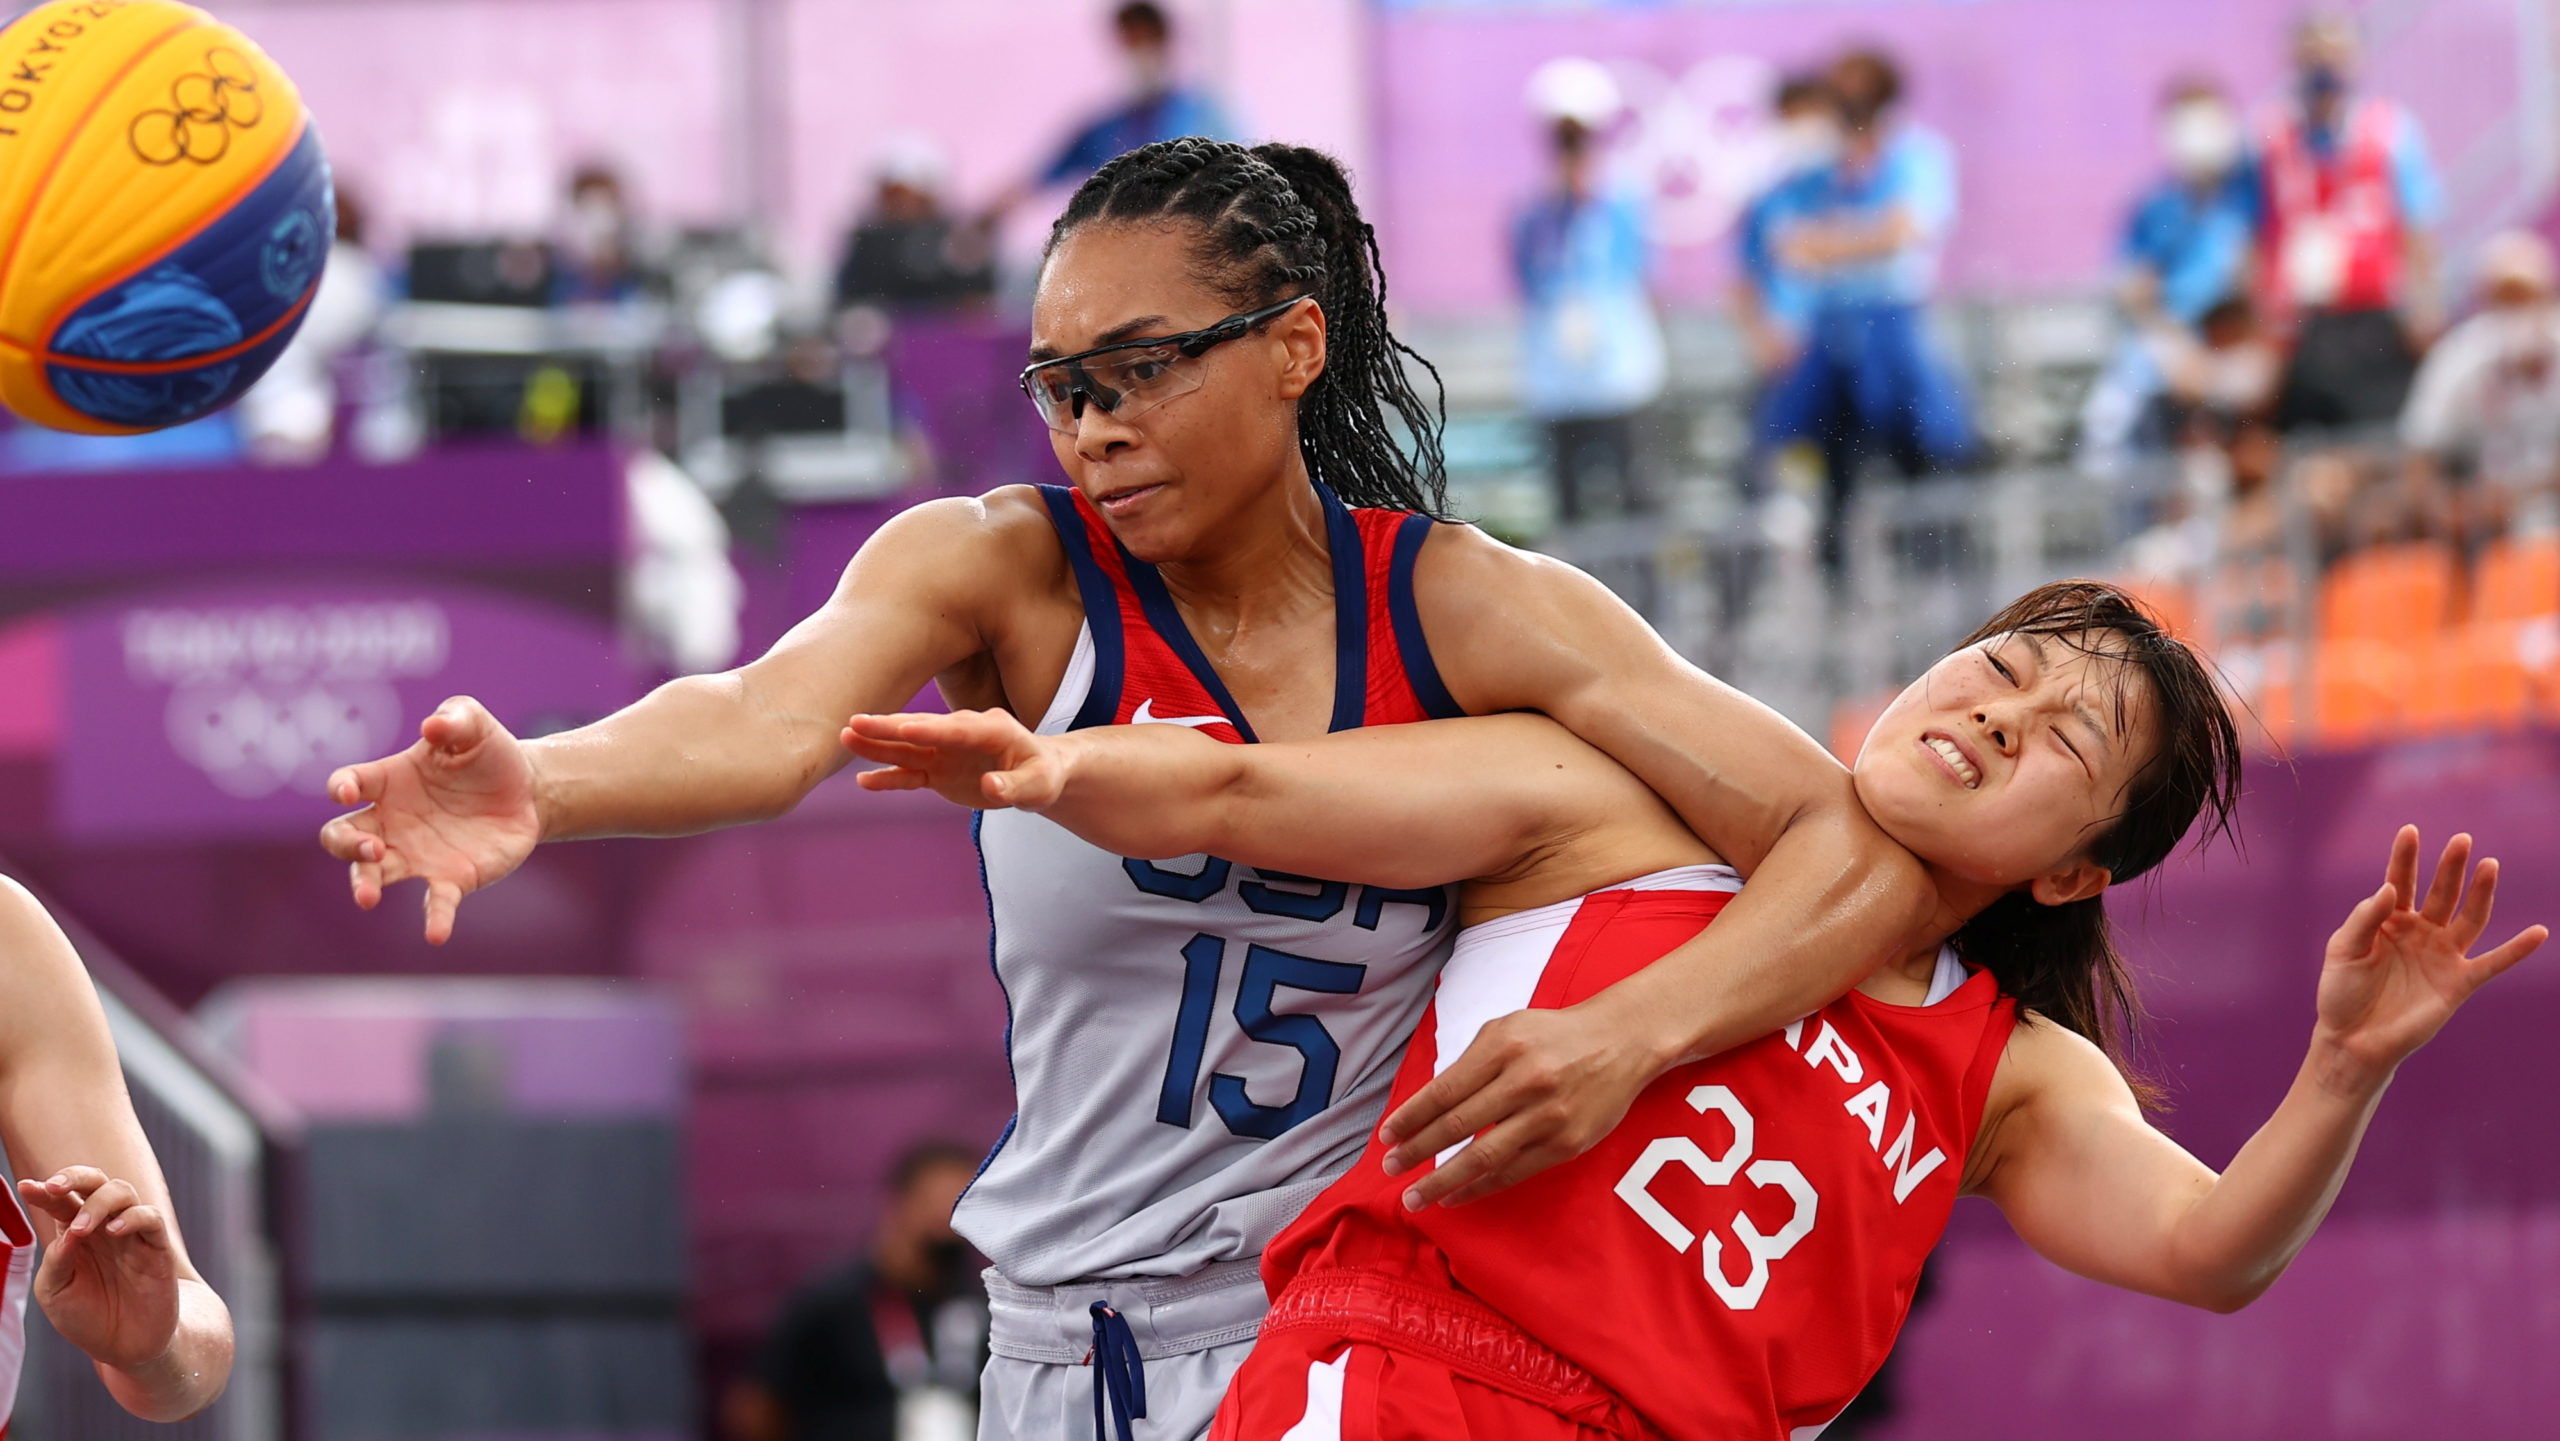 Tokyo 2020 Olympics - Basketball 3x3 - Women - Pool A - United States v Japan - Aomi Urban Sports Park, Tokyo, Japan - July 27, 2021. Allisha Gray of the United States in action with Risa Nishioka of Japan and Mai Yamamoto of Japan during a match. 